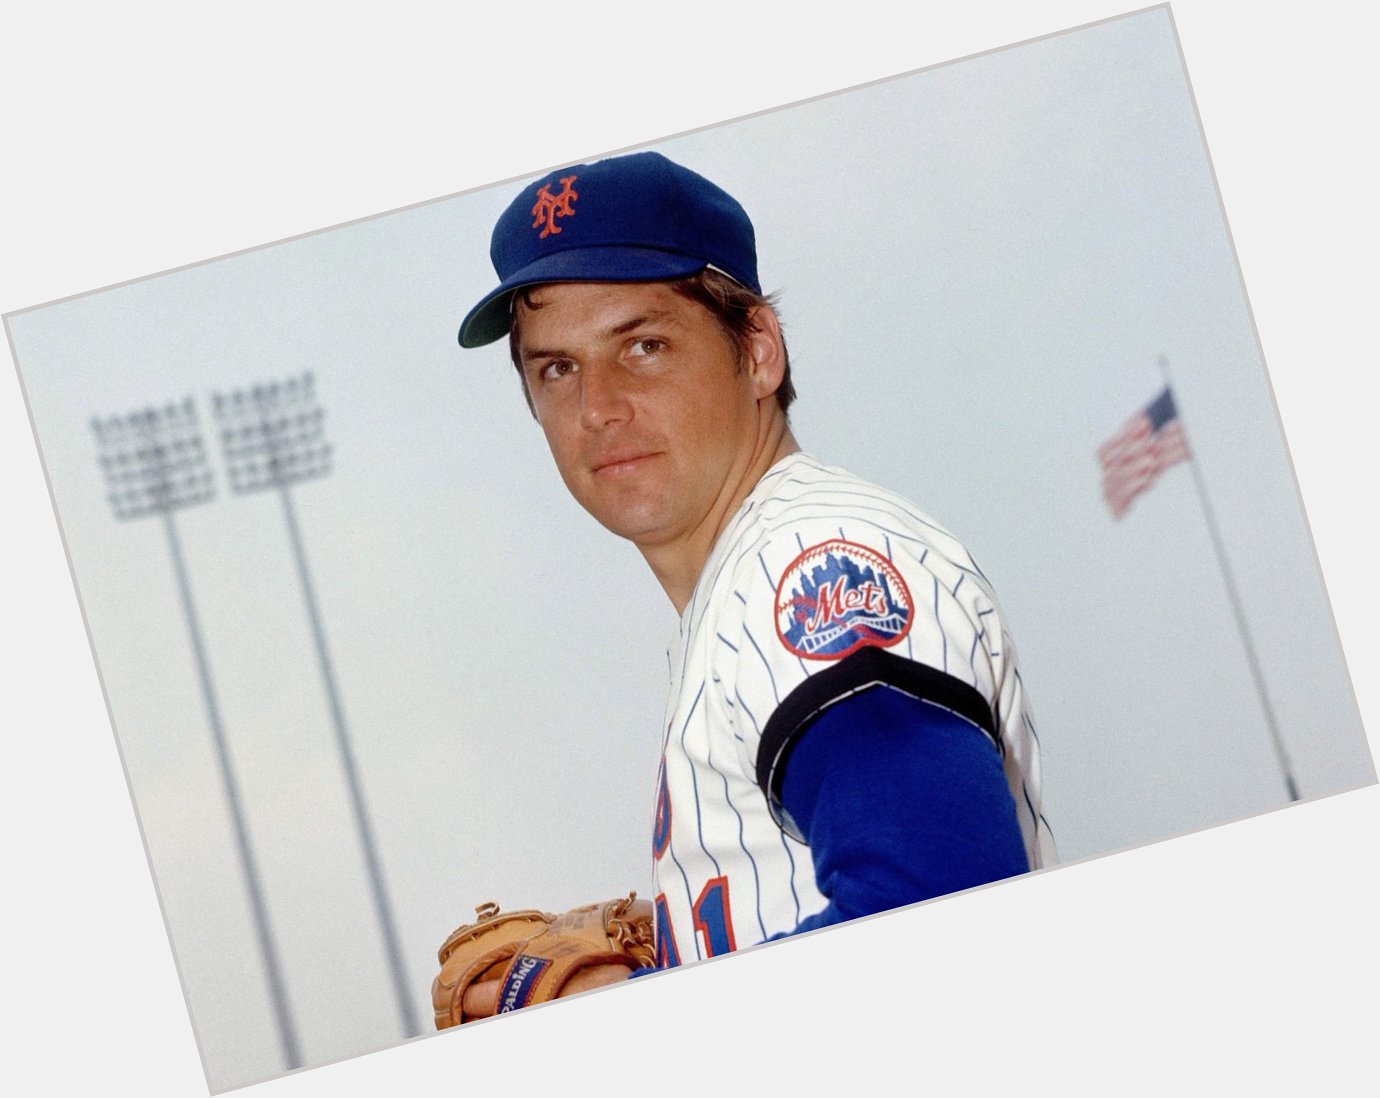 The great Tom Seaver was born on November 17, 1944 in Fresno, California. Happy birthday to him on his 71st. 